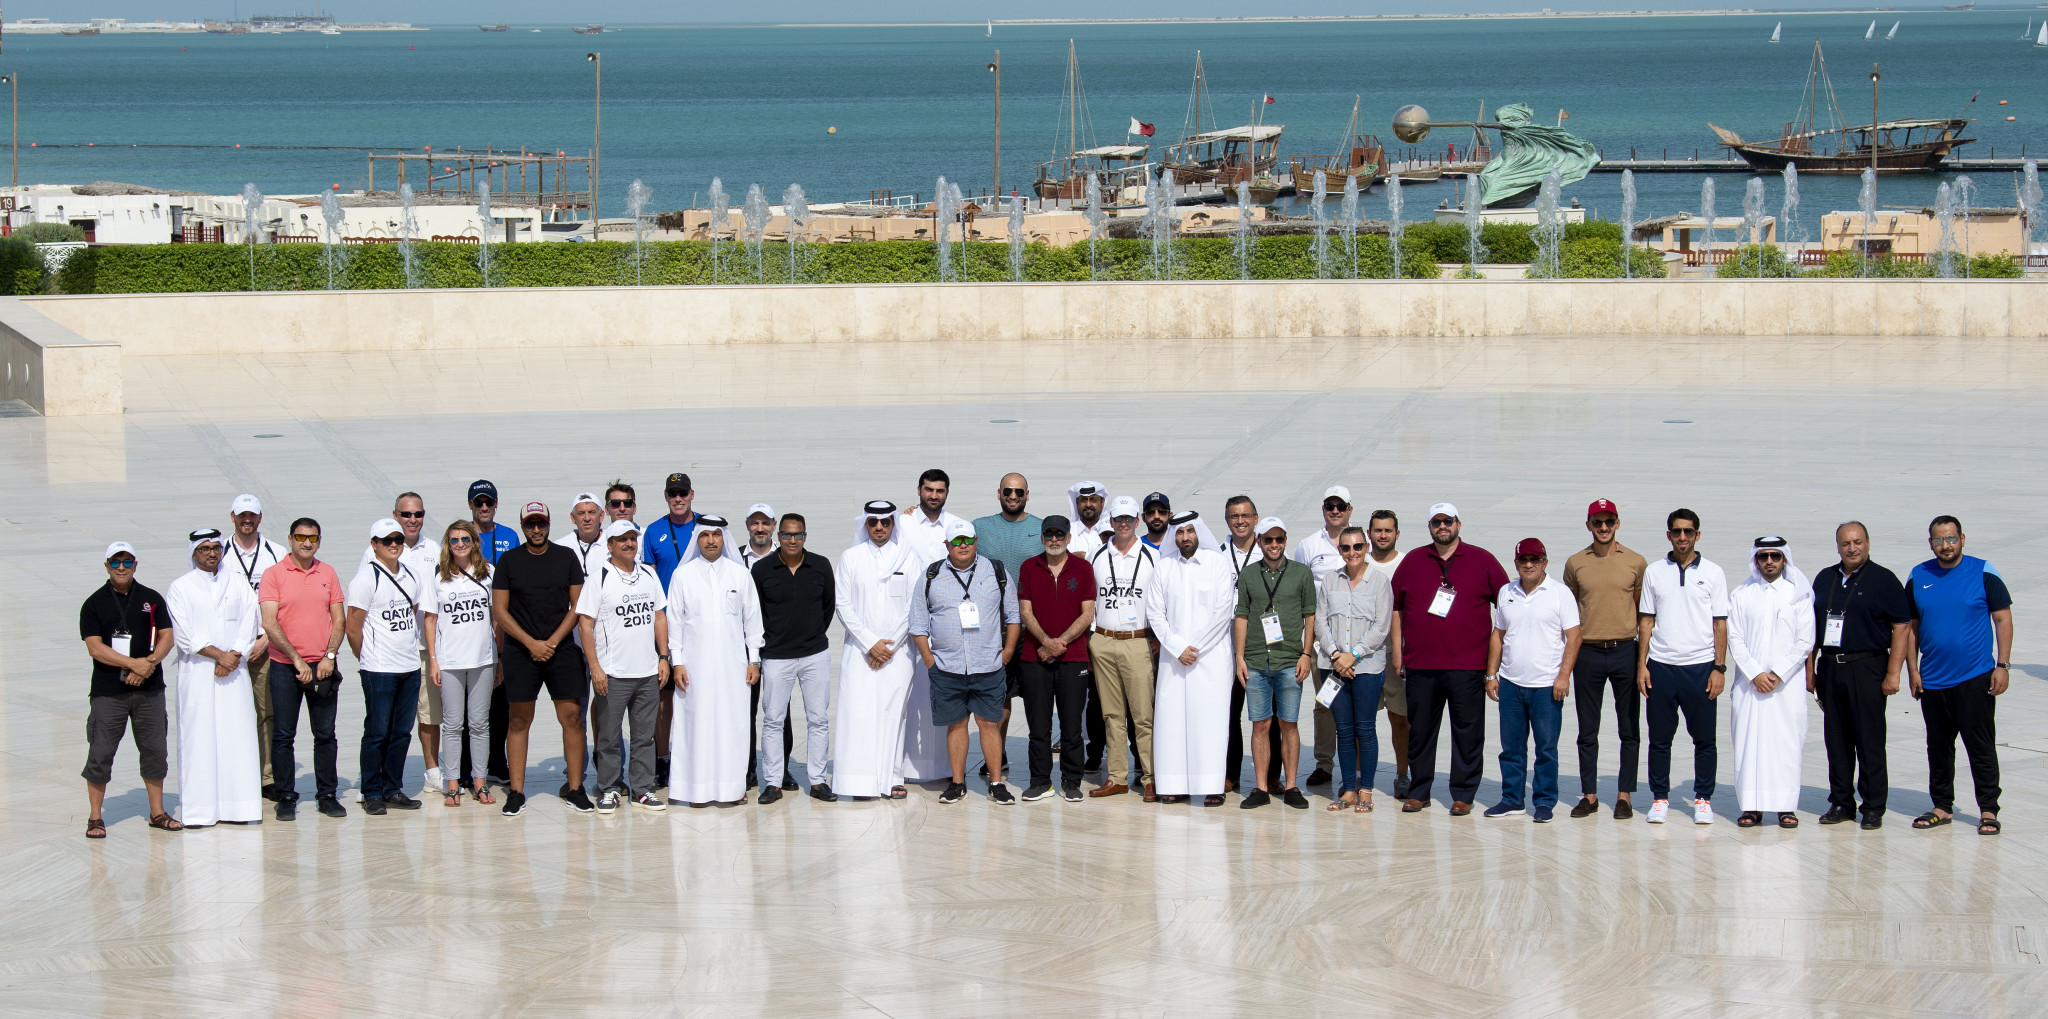 Officials were given a tour of venues and were updated on progress for the event by the Organising Committee ©ANOC